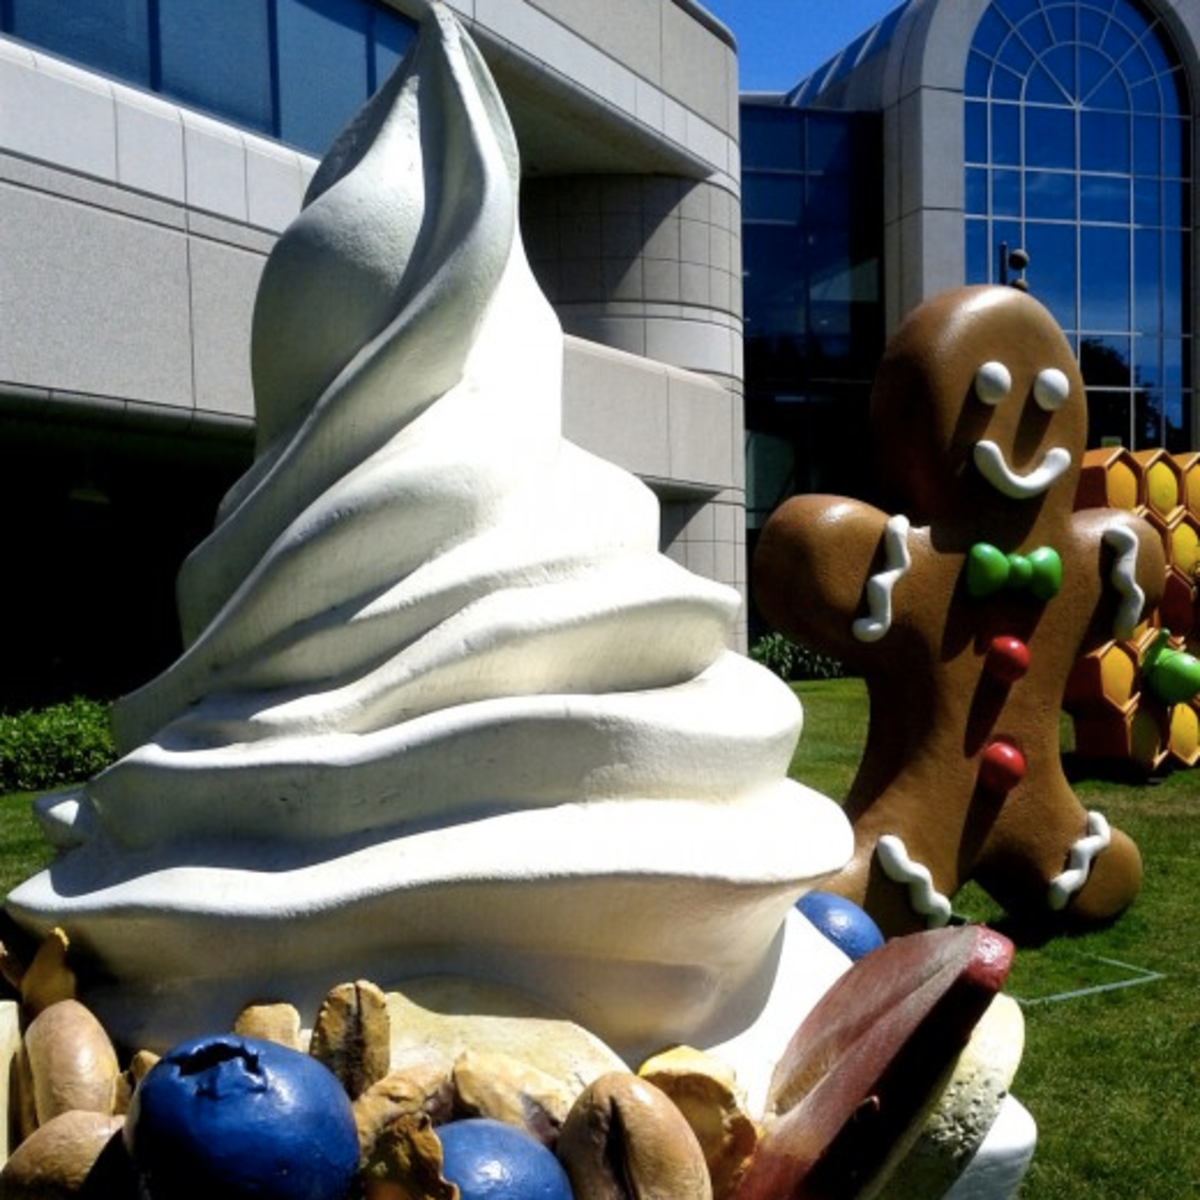 The Android froyo on Google's campus